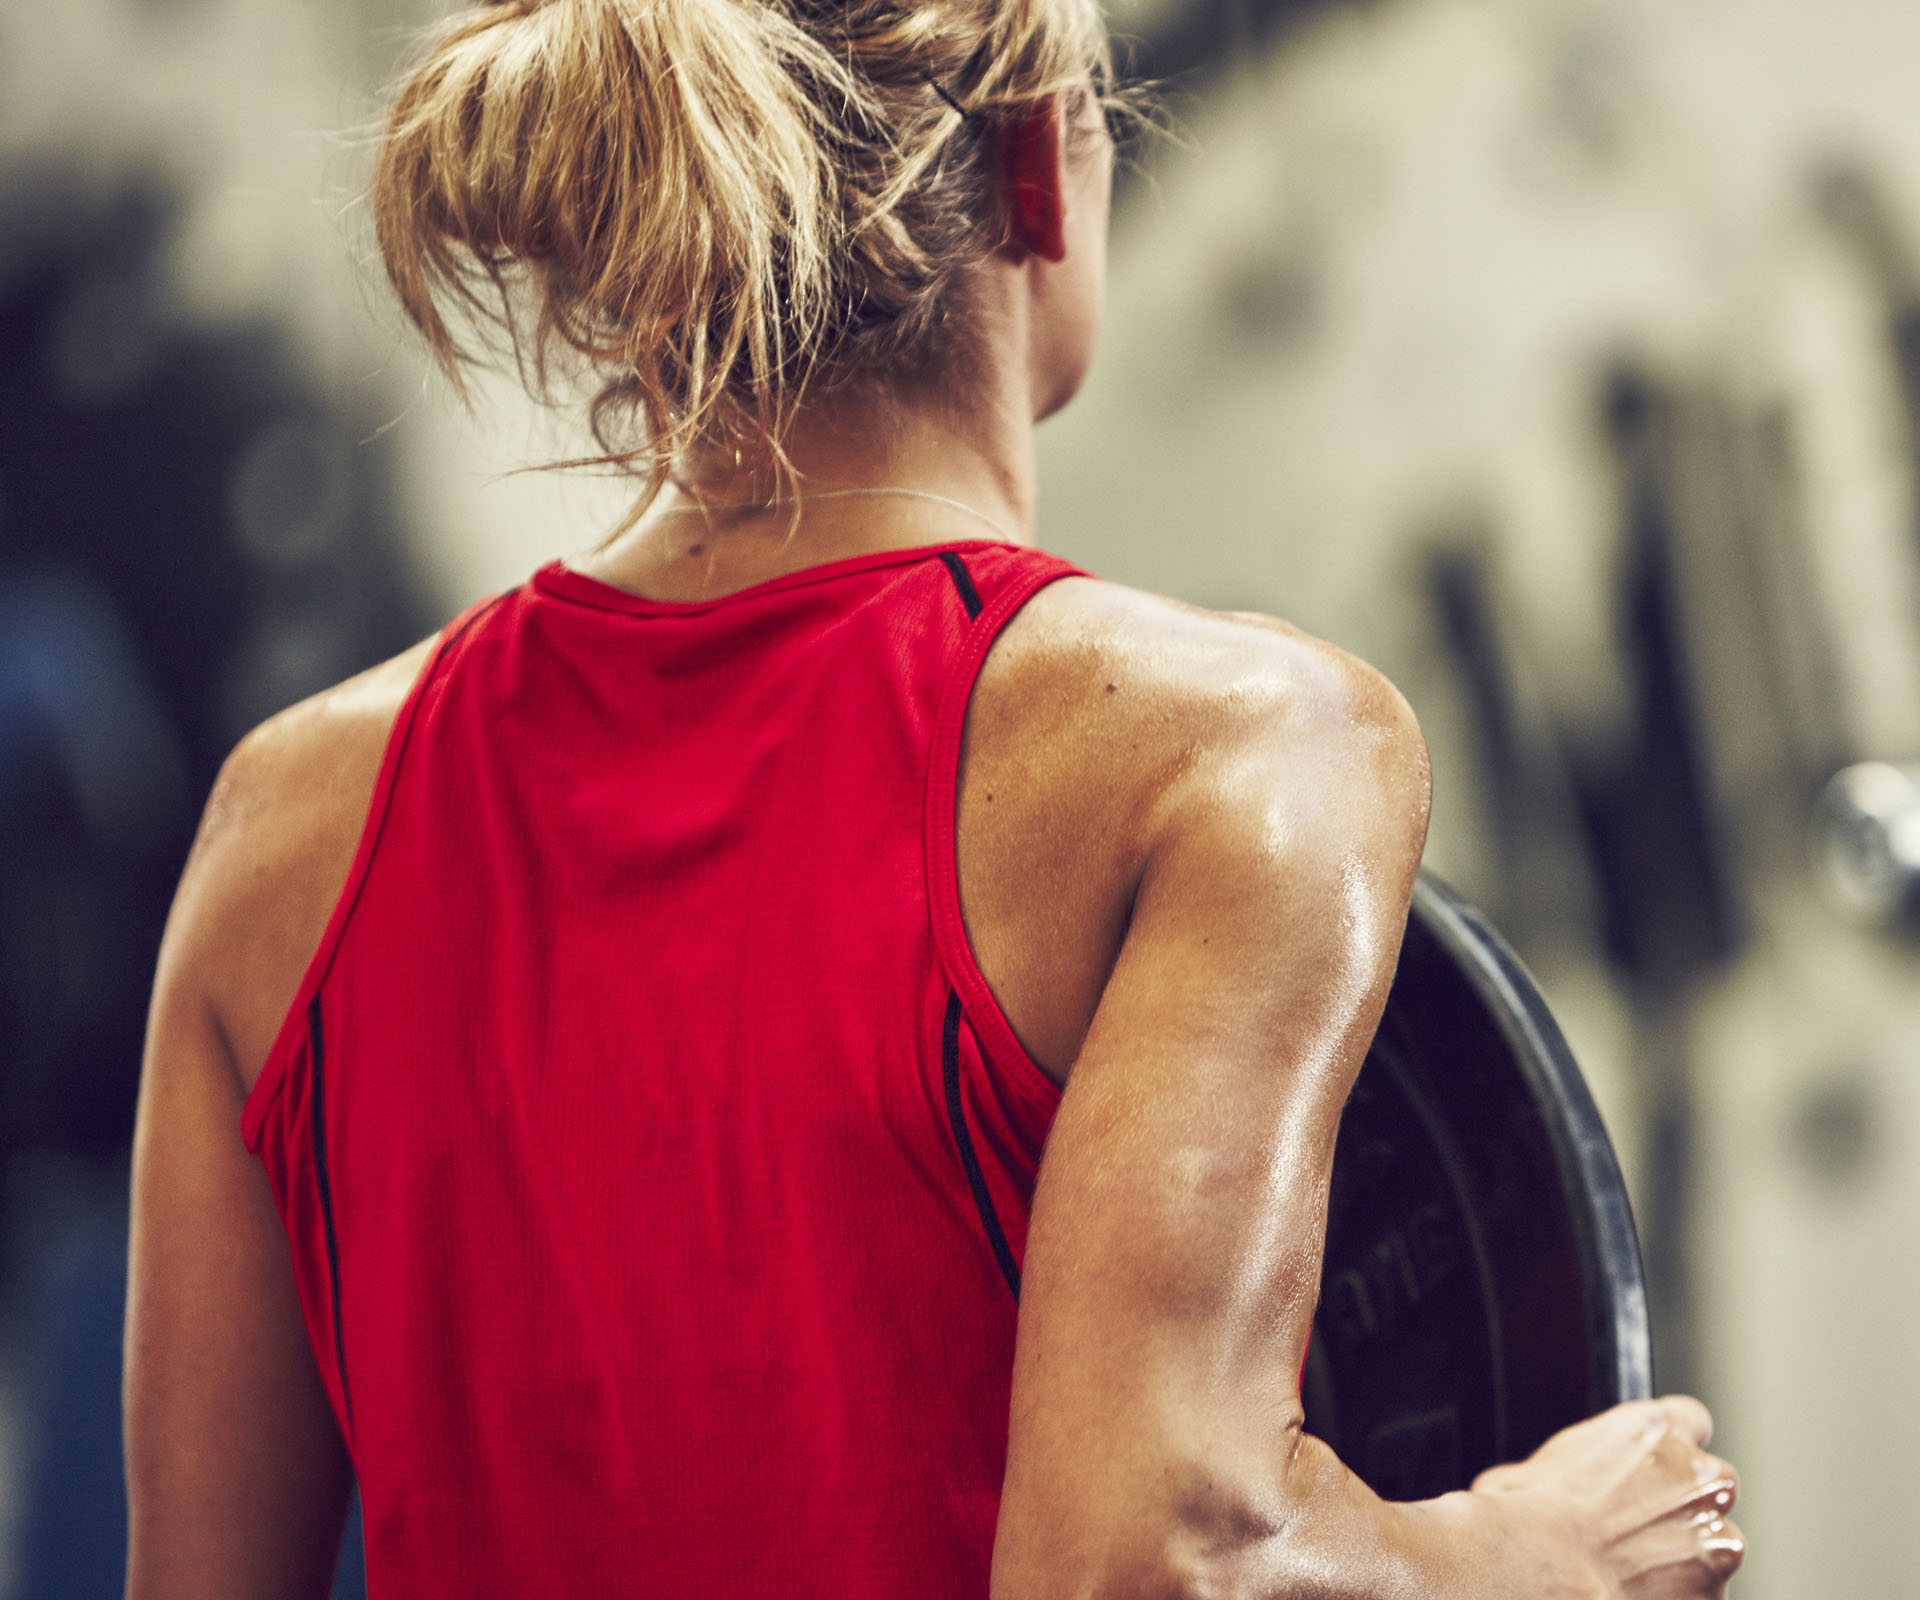 Experts warn: ‘Going to the gym could be making you sick’